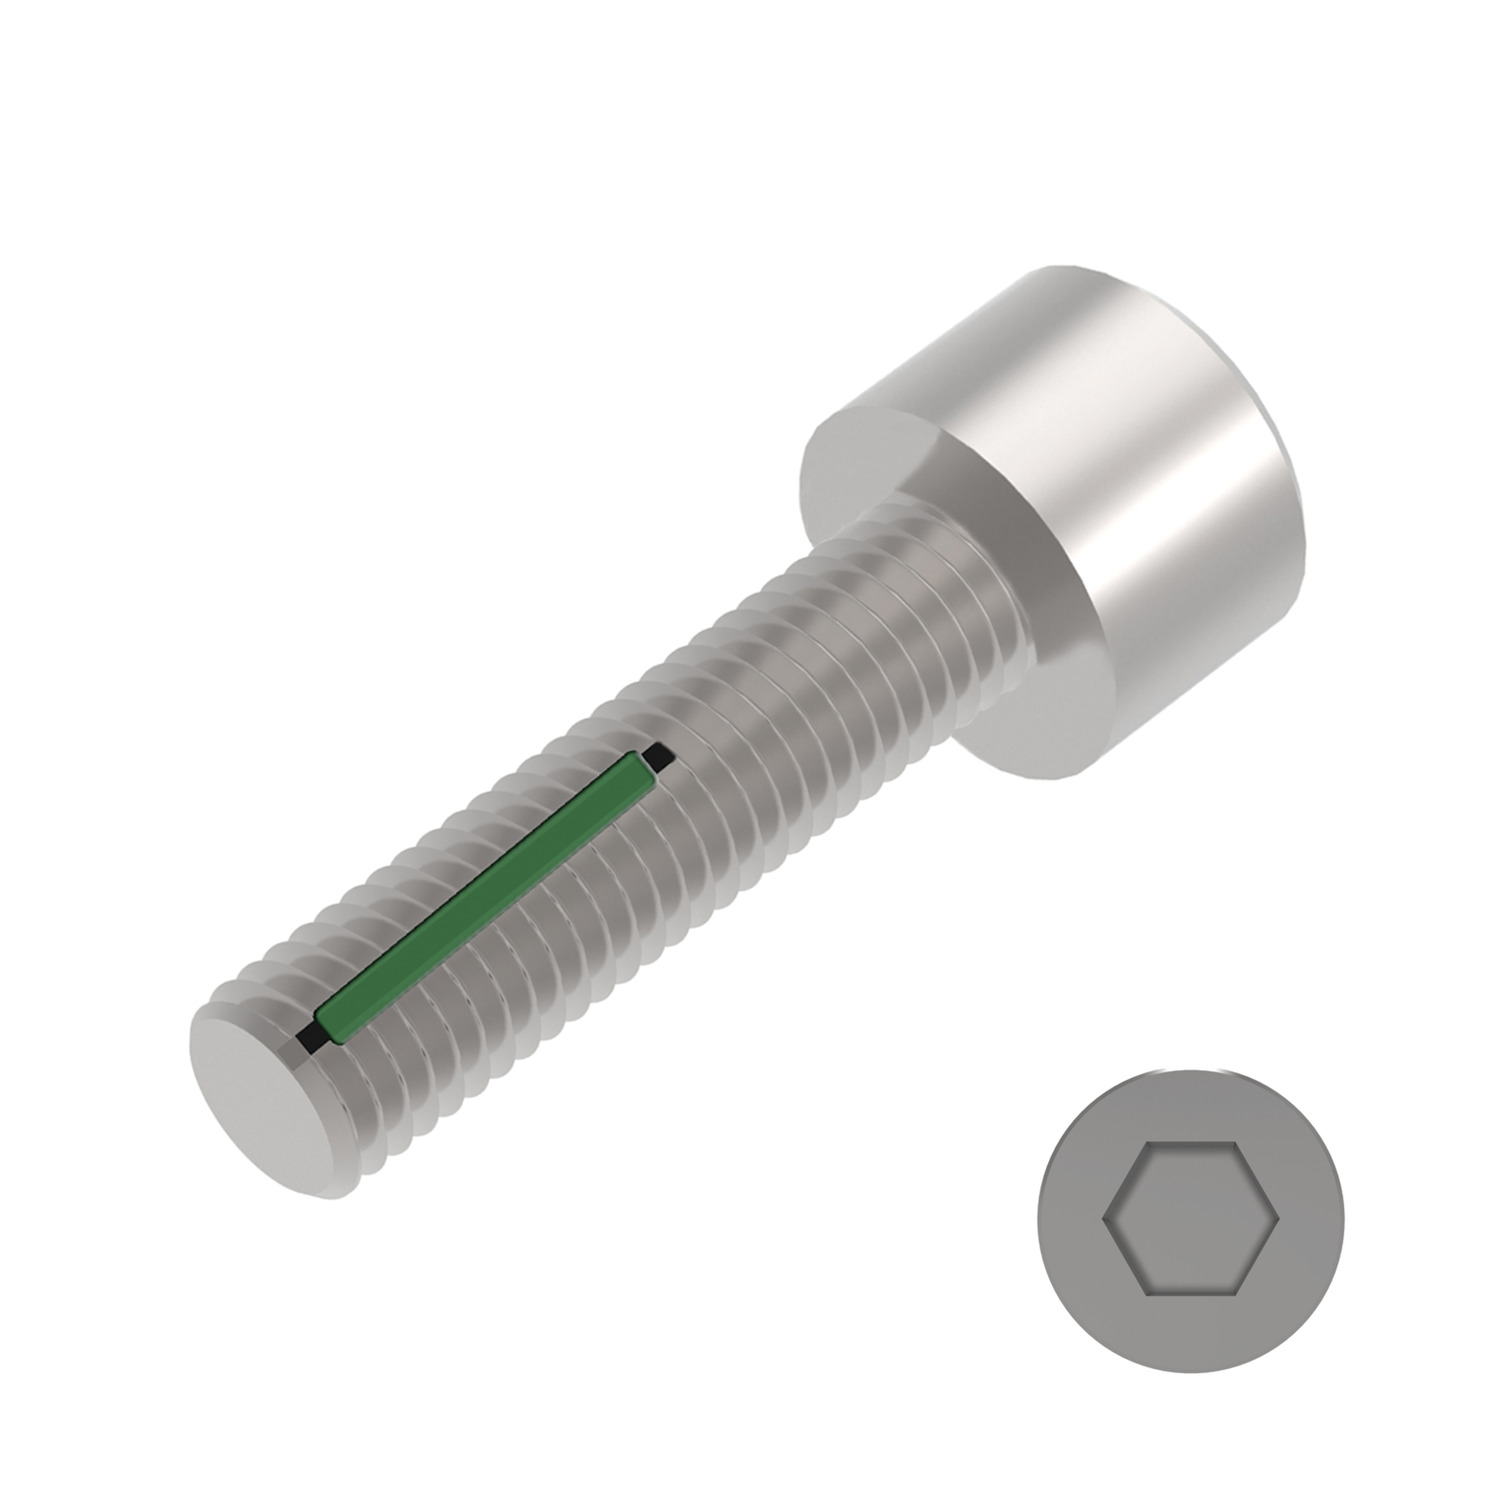 Self-Locking Cap Screws Vibration proof. Standard green locking patch. Breakaway torque values are complex and can be calculated on request.